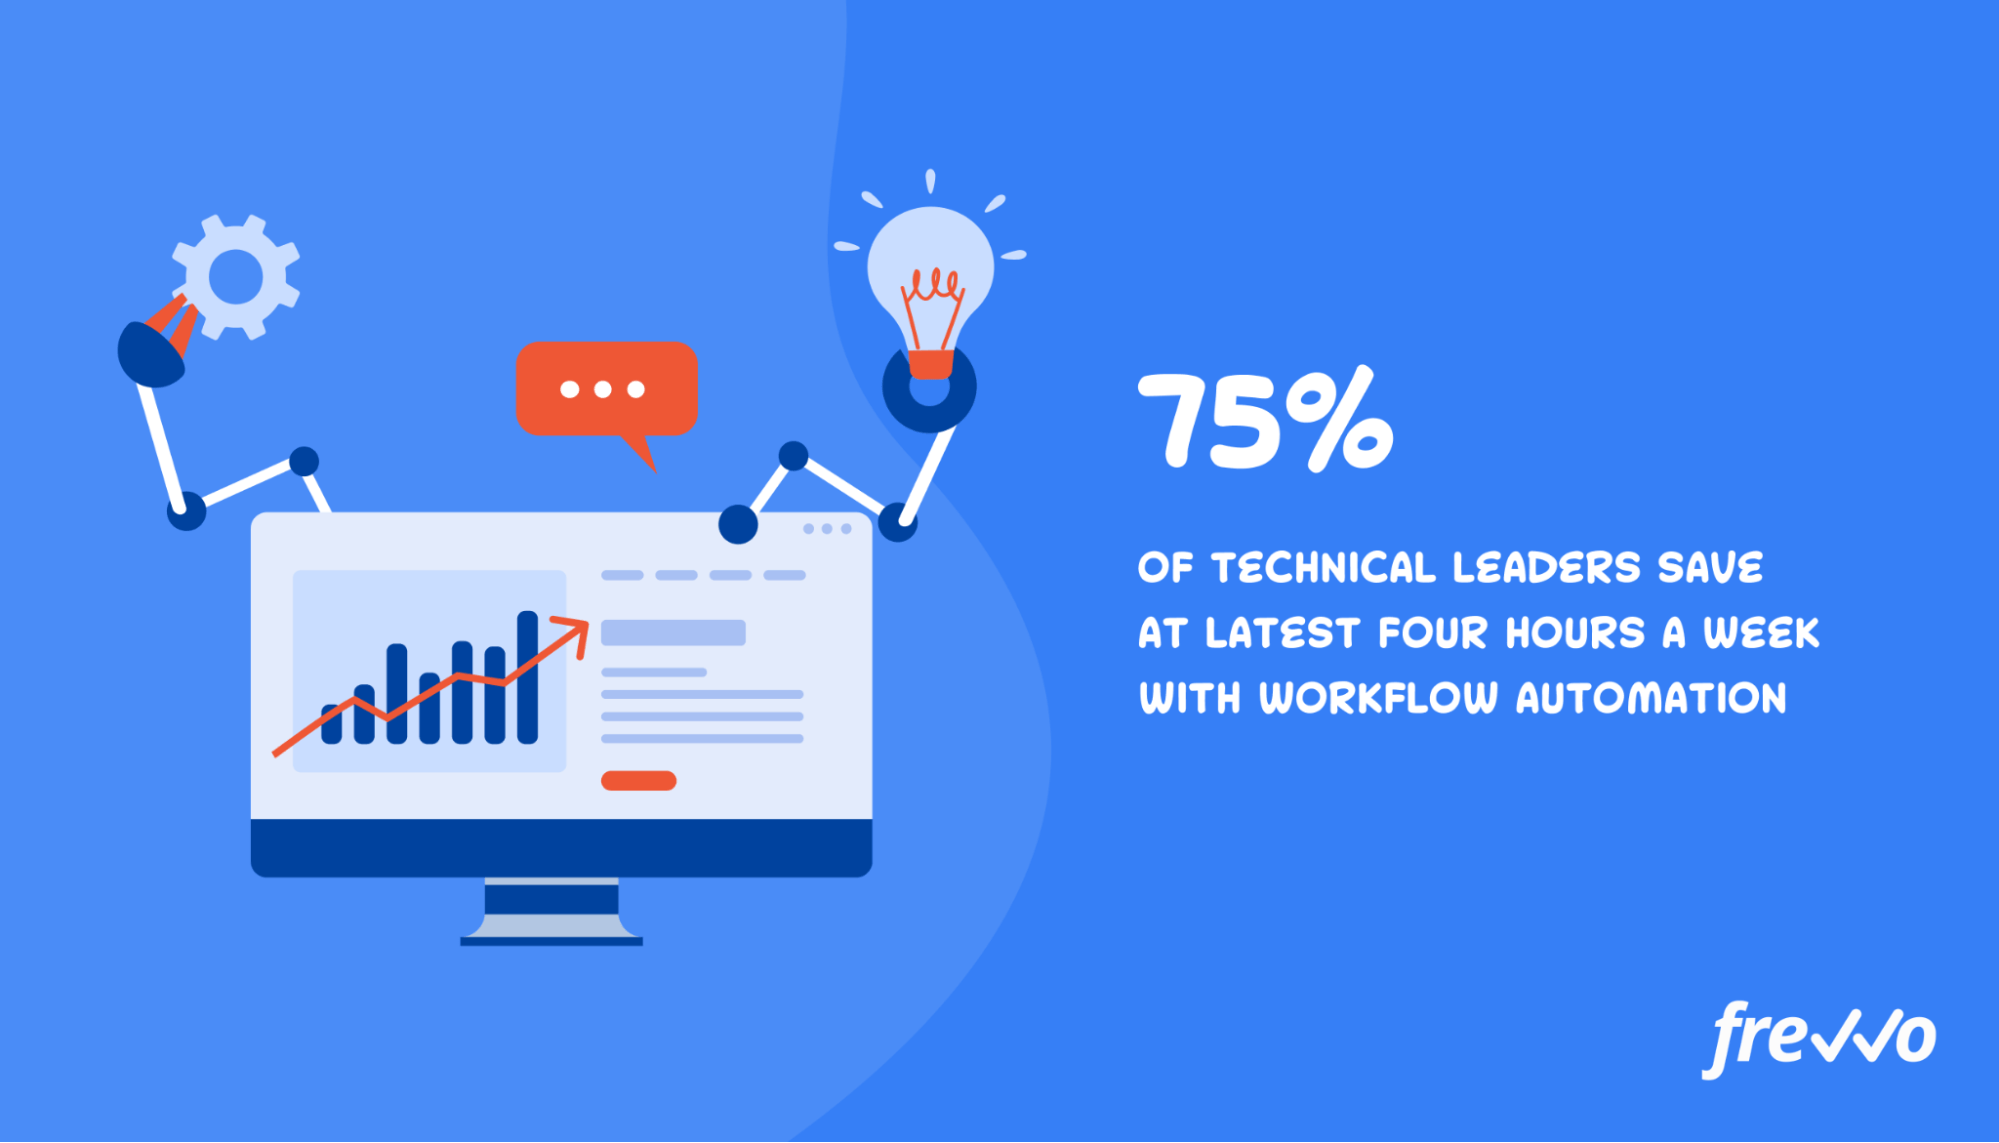 75% of technical leaders save four hours a week using workflow automation software